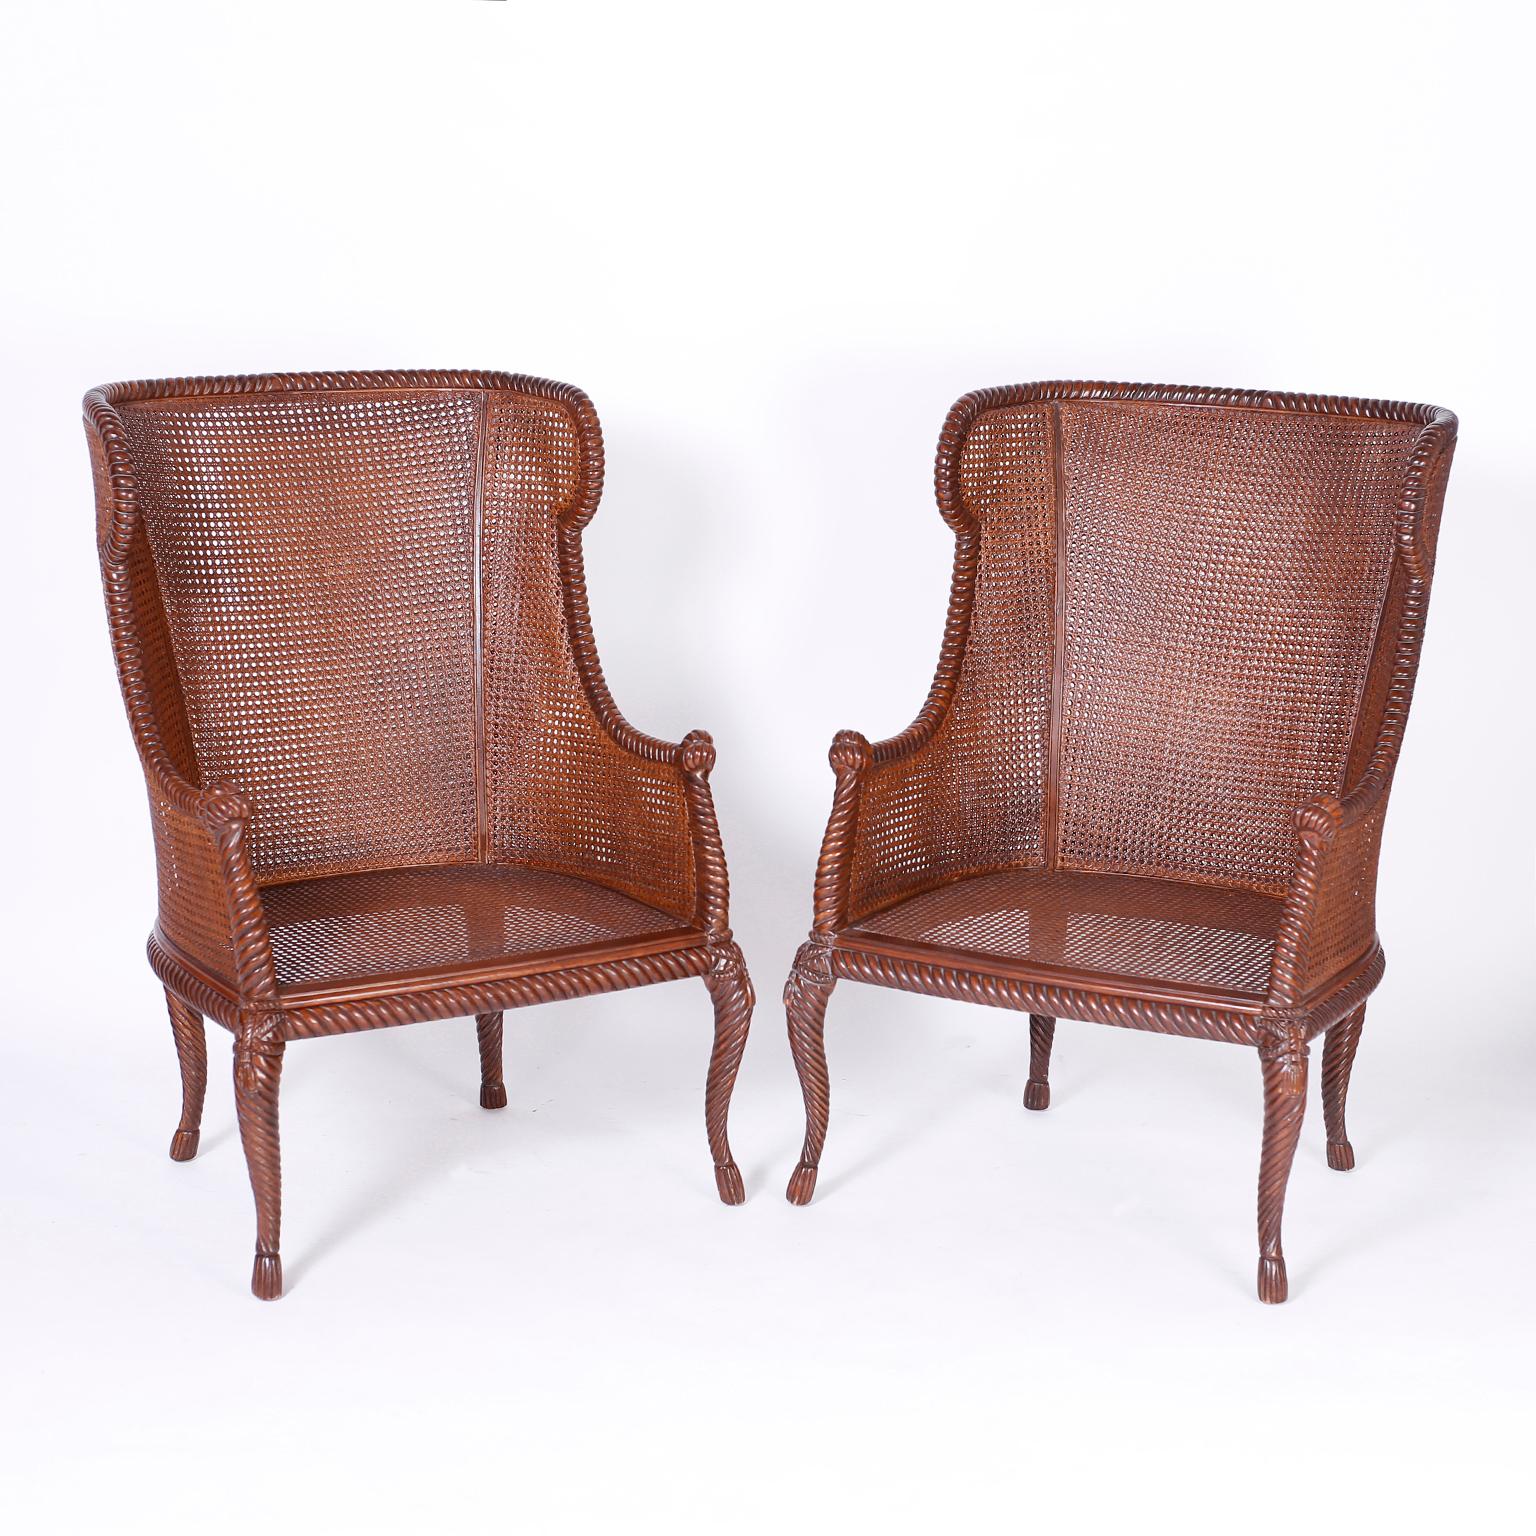 Pair of wingback armchairs featuring carved mahogany frames with a rope and tassel motif, double caned backs, sides and seats, cabriole legs with tassel feet and an overall elegant form.

Measure: Seat height: 20